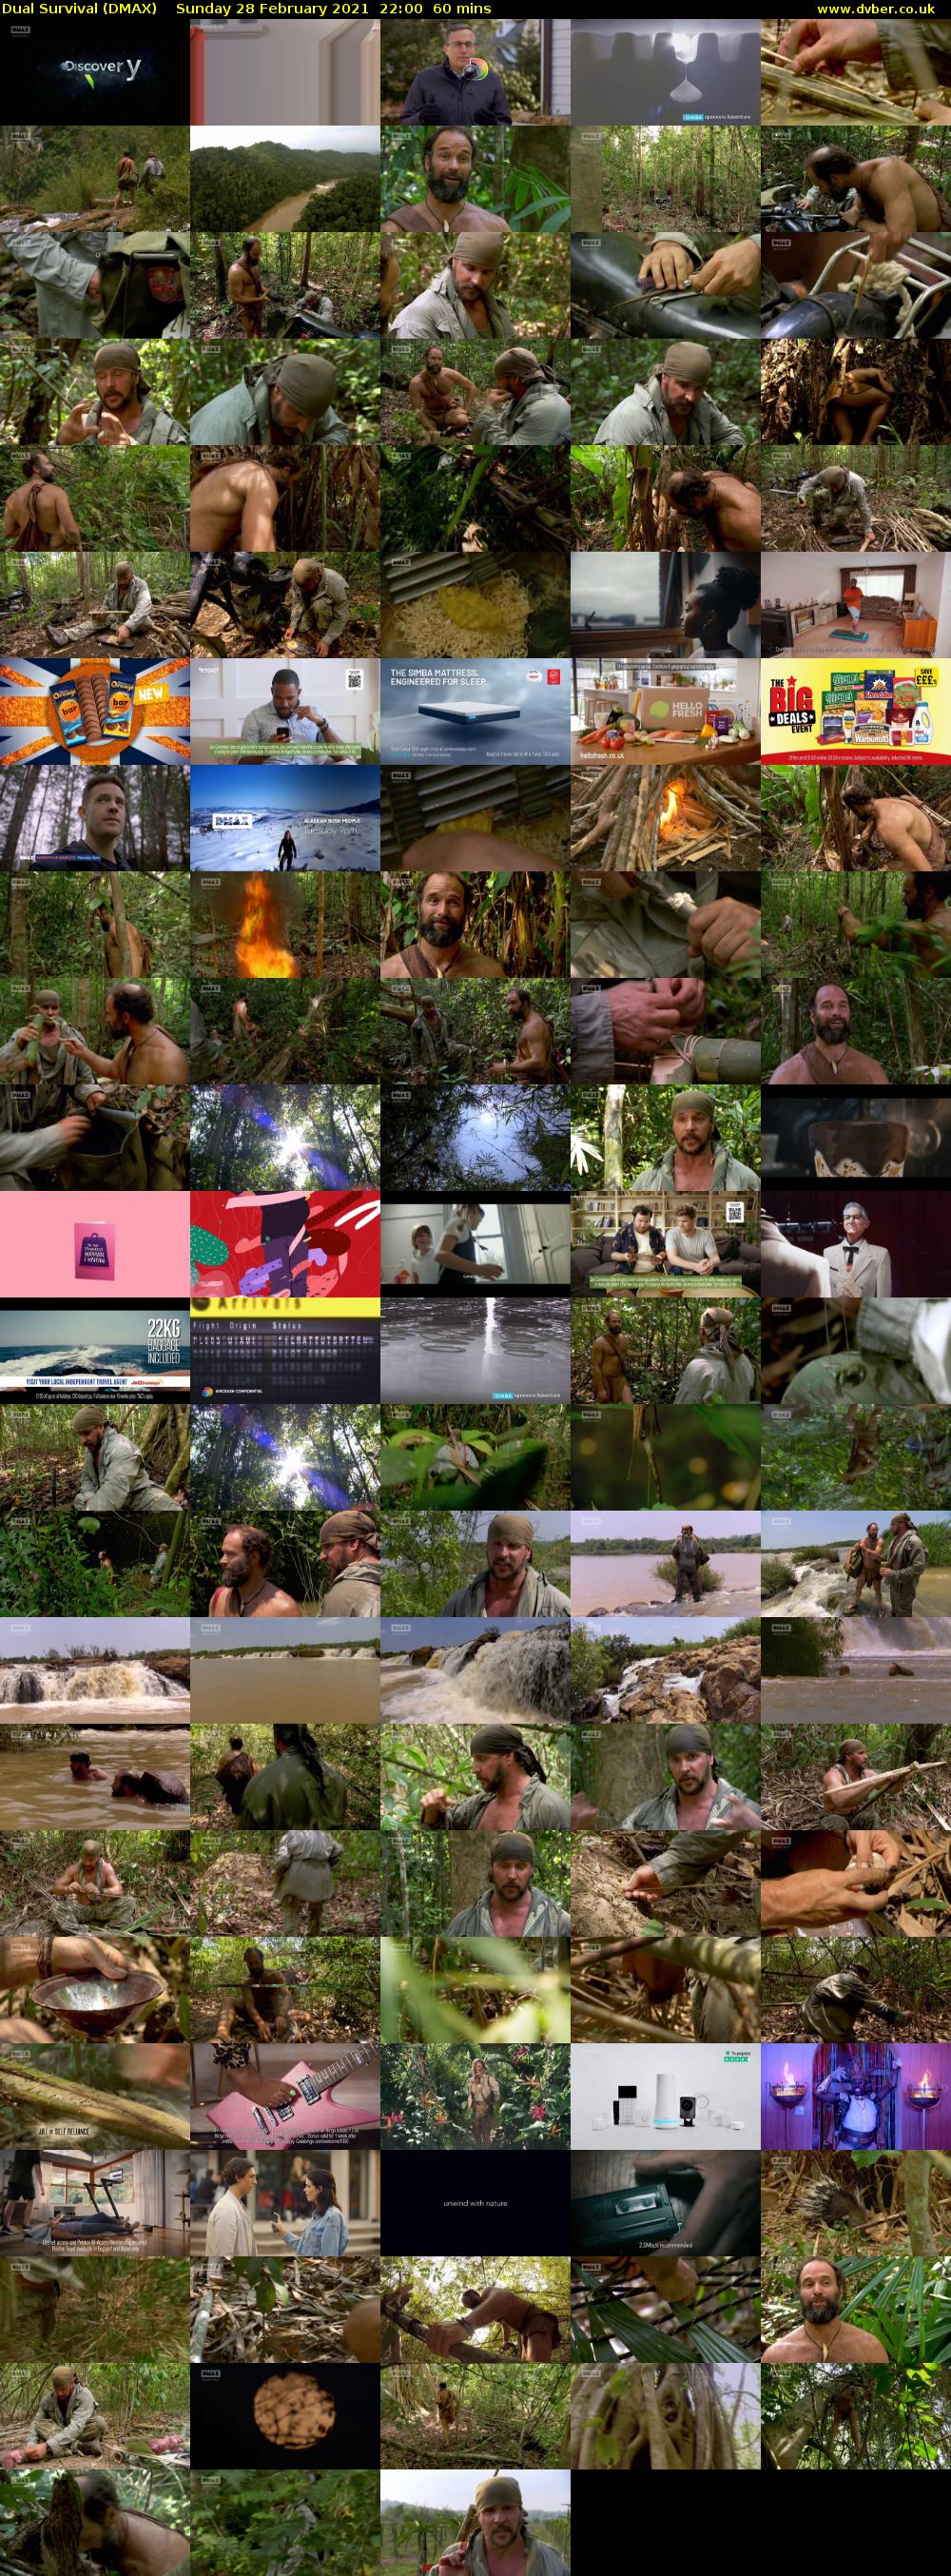 Dual Survival (DMAX) Sunday 28 February 2021 22:00 - 23:00